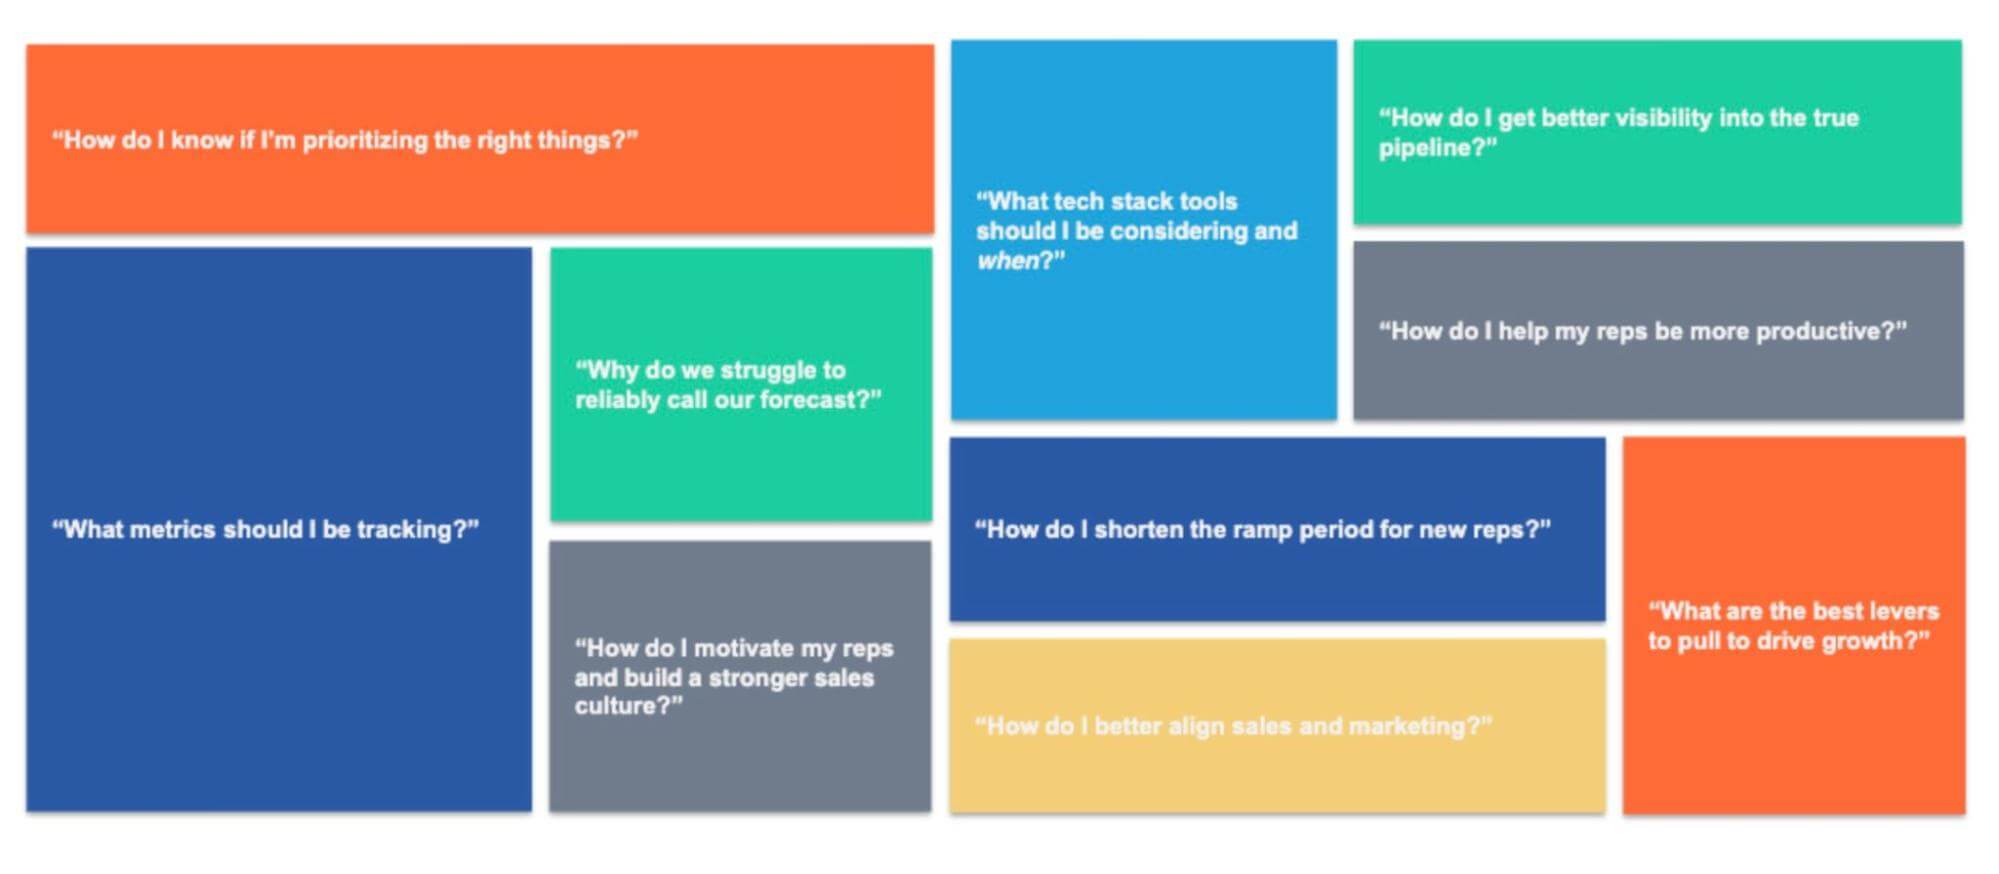 Common questions among sales and marketing leaders